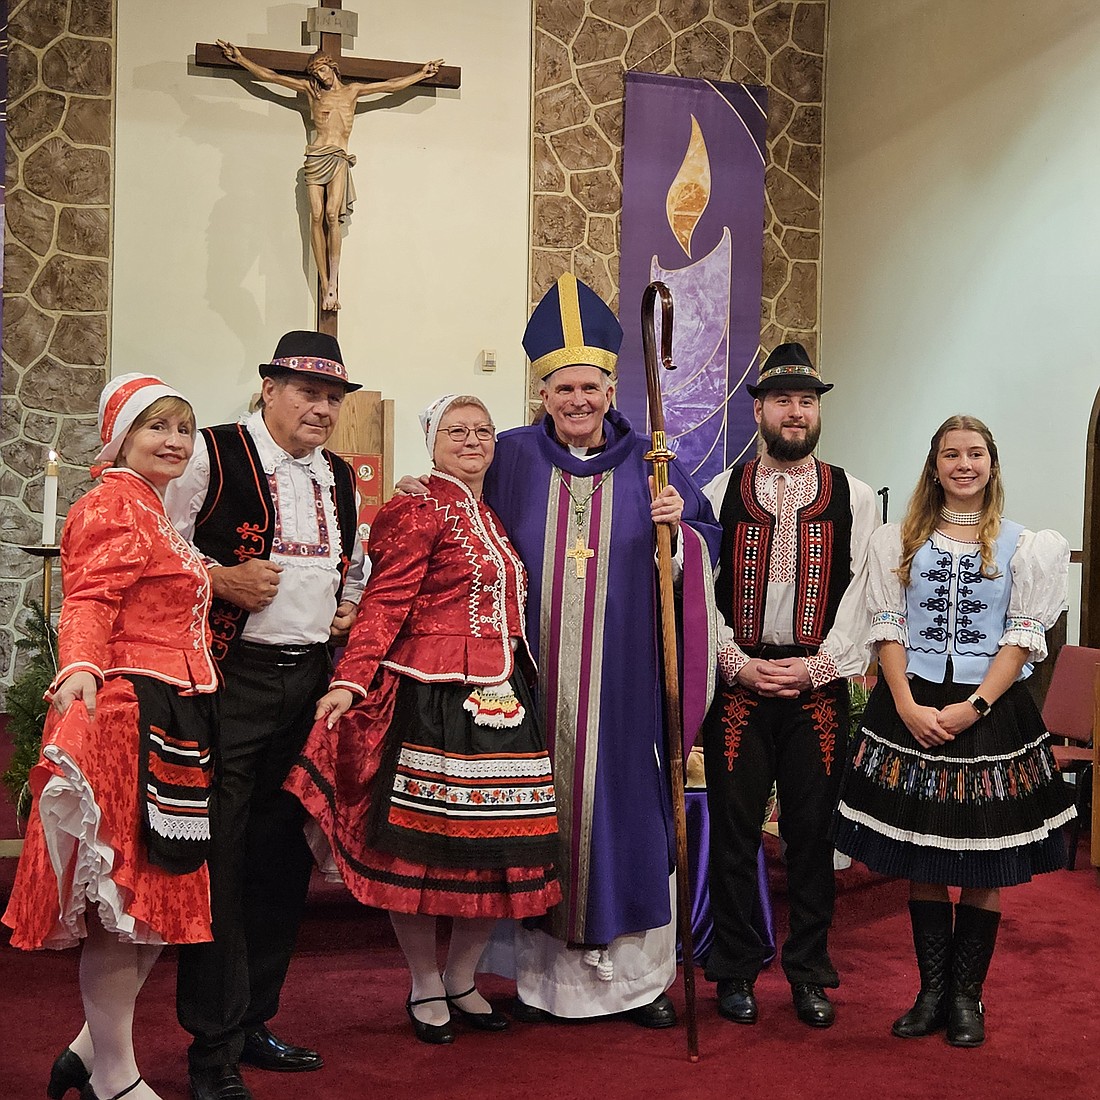 Bishop O'Connell and members of the Slovak community pose for a photo in the sanctuary of St. Michael Church. Mary Stadnyk photo